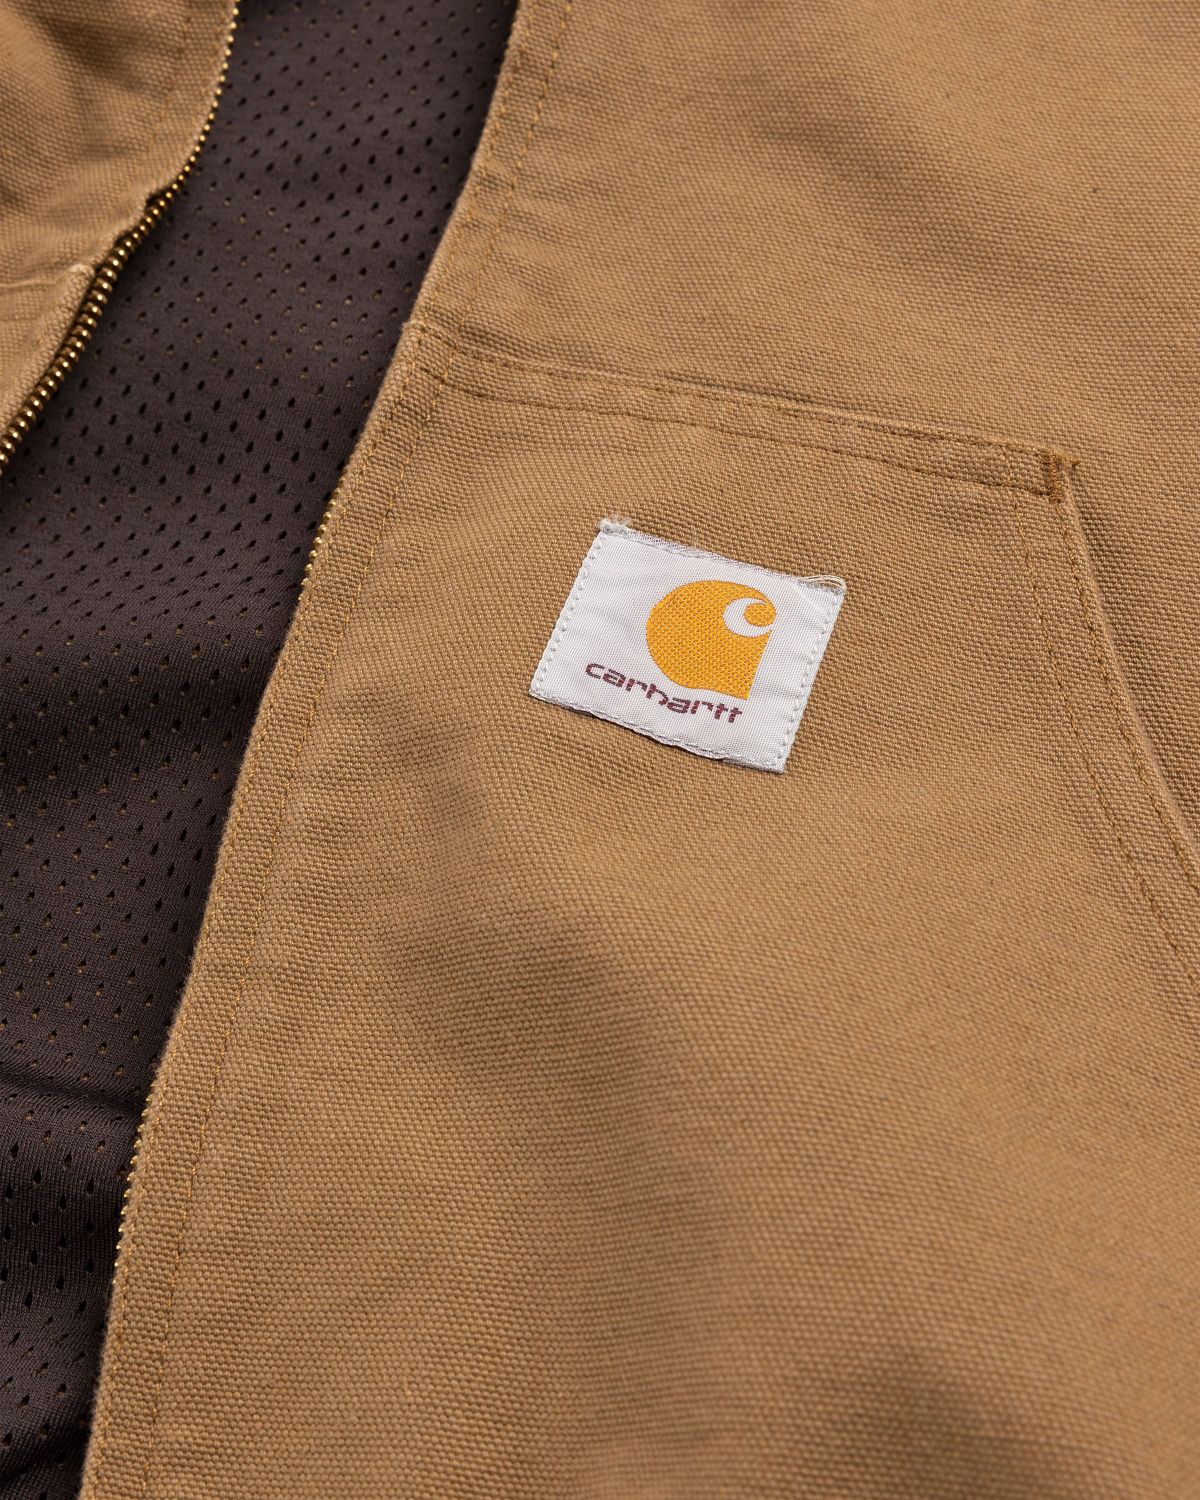 Carhartt WIP – Active Jacket Brown - Outerwear - Brown - Image 5